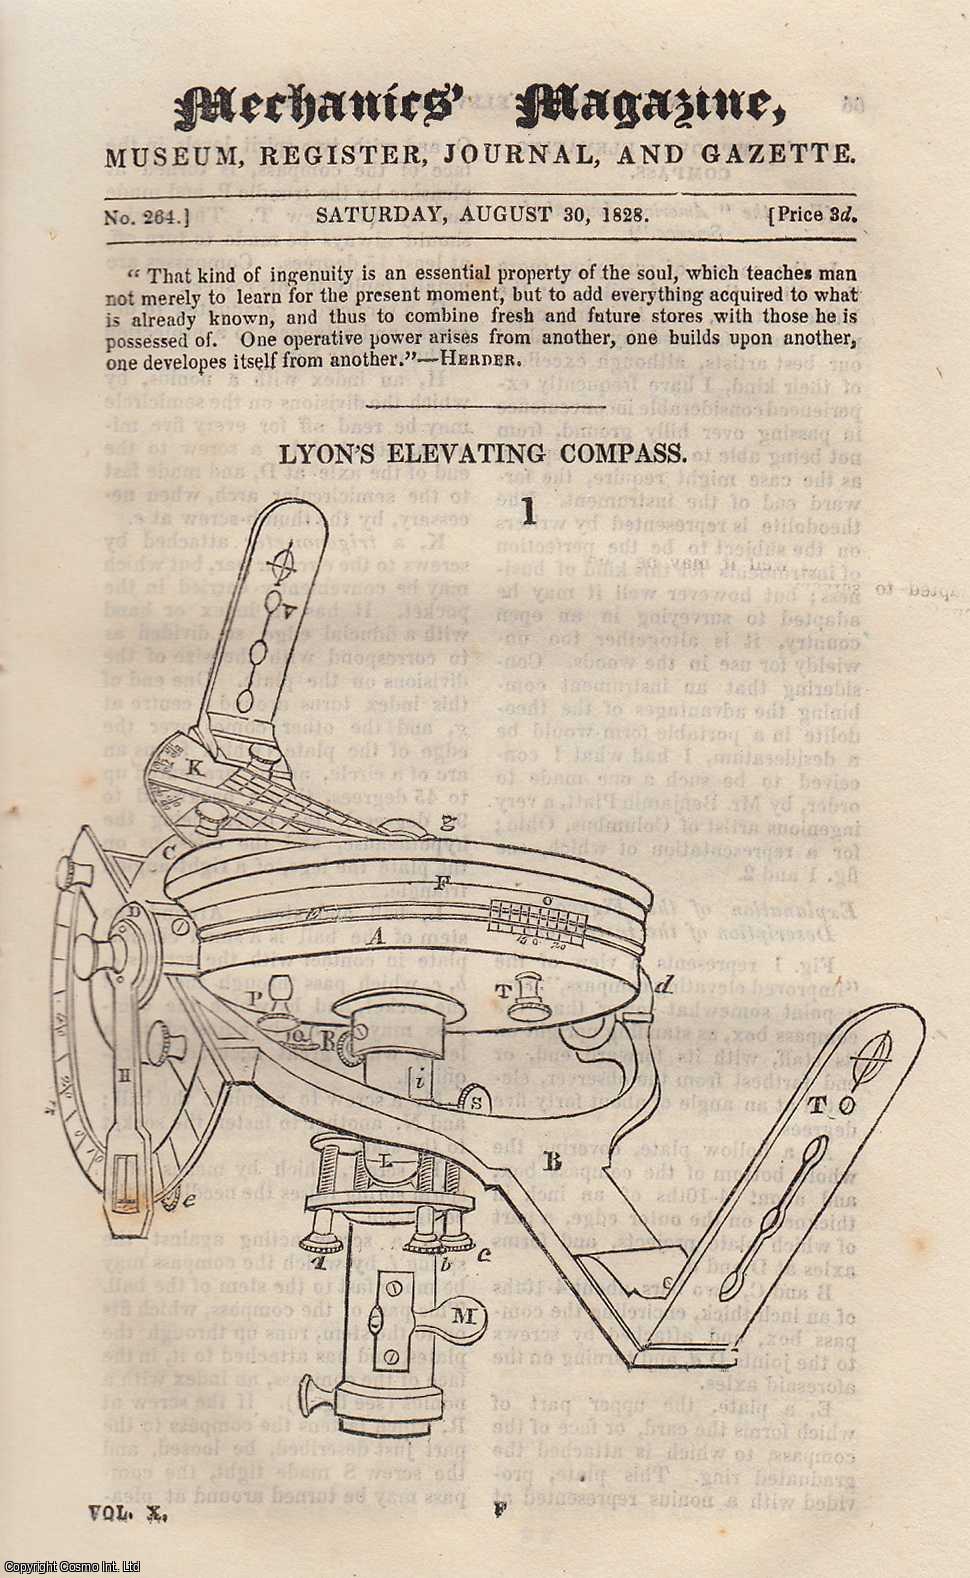 Mechanics Magazine - Lyon's Elevating Compass; Drying Grain; Skene's Steam-Boat Paddle Wheel; Hint of a Method of Obtaining a Measure of Longitude, etc. Mechanics Magazine, Museum, Register, Journal and Gazette. Issue No. 264. A complete rare weekly issue of the Mechanics' Magazine, 1828.